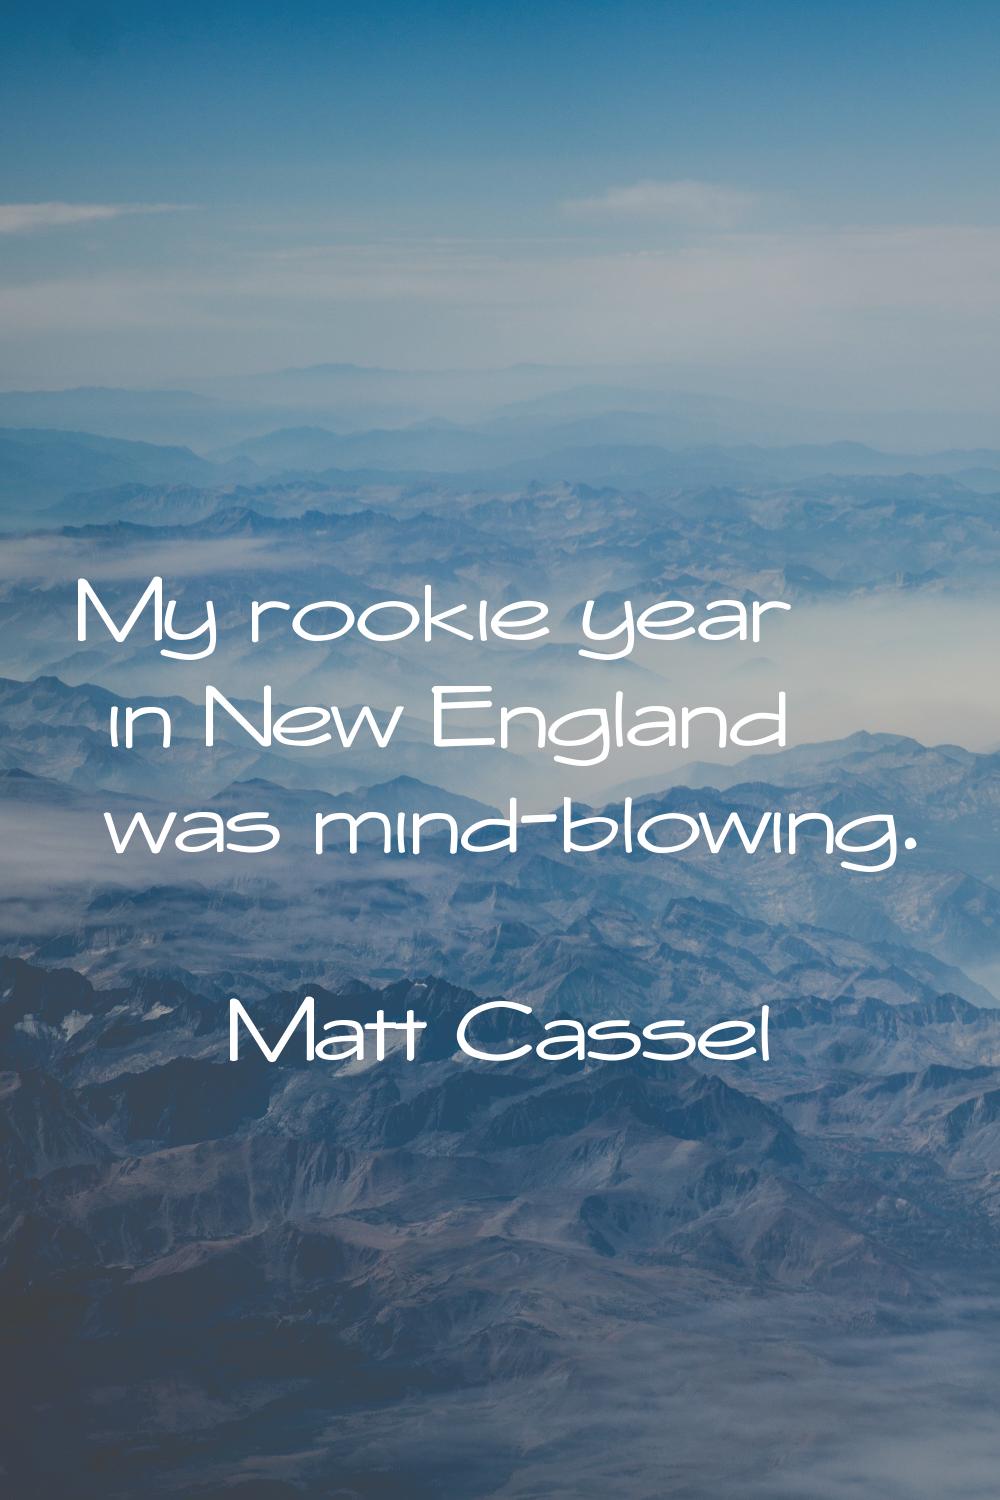 My rookie year in New England was mind-blowing.